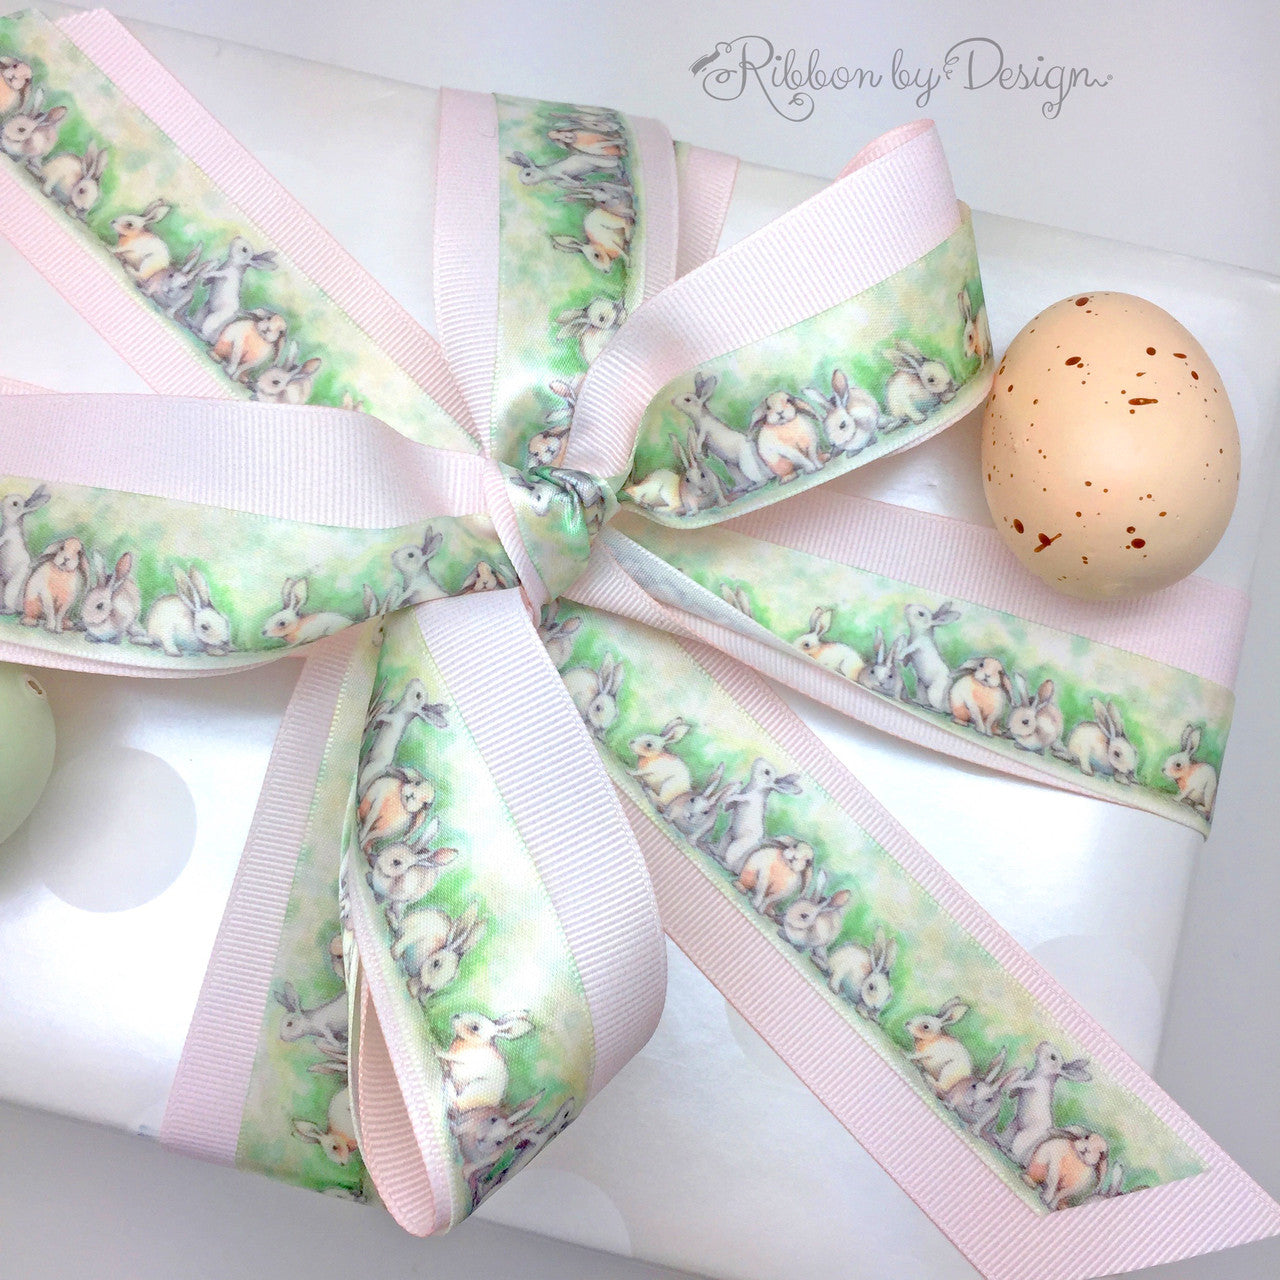 Our beautiful watercolor bunnies make the best presentation of an Easter gift! So soft and sweet!